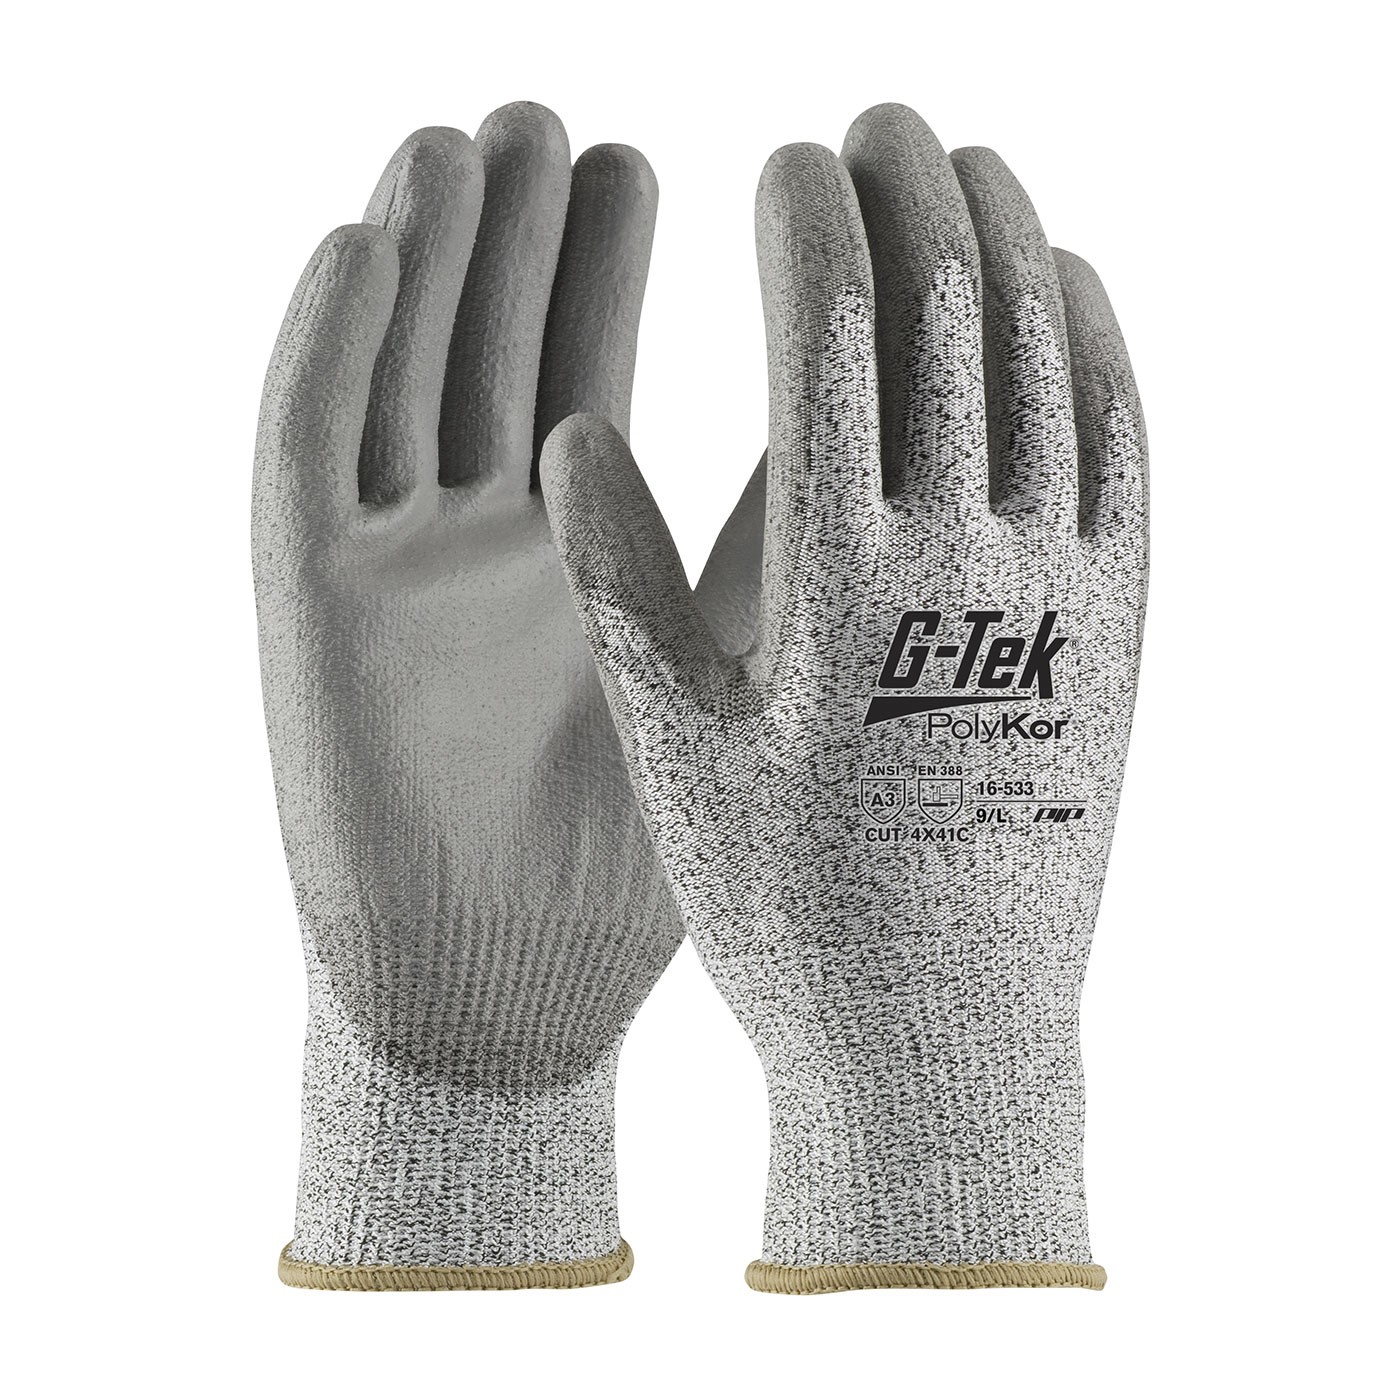 G-Tek® PolyKor® Industry Grade Seamless Knit PolyKor® Blended Glove with Polyurethane Coated Smooth Grip on Palm & Fingers - Bulk Pack  (#16-533)